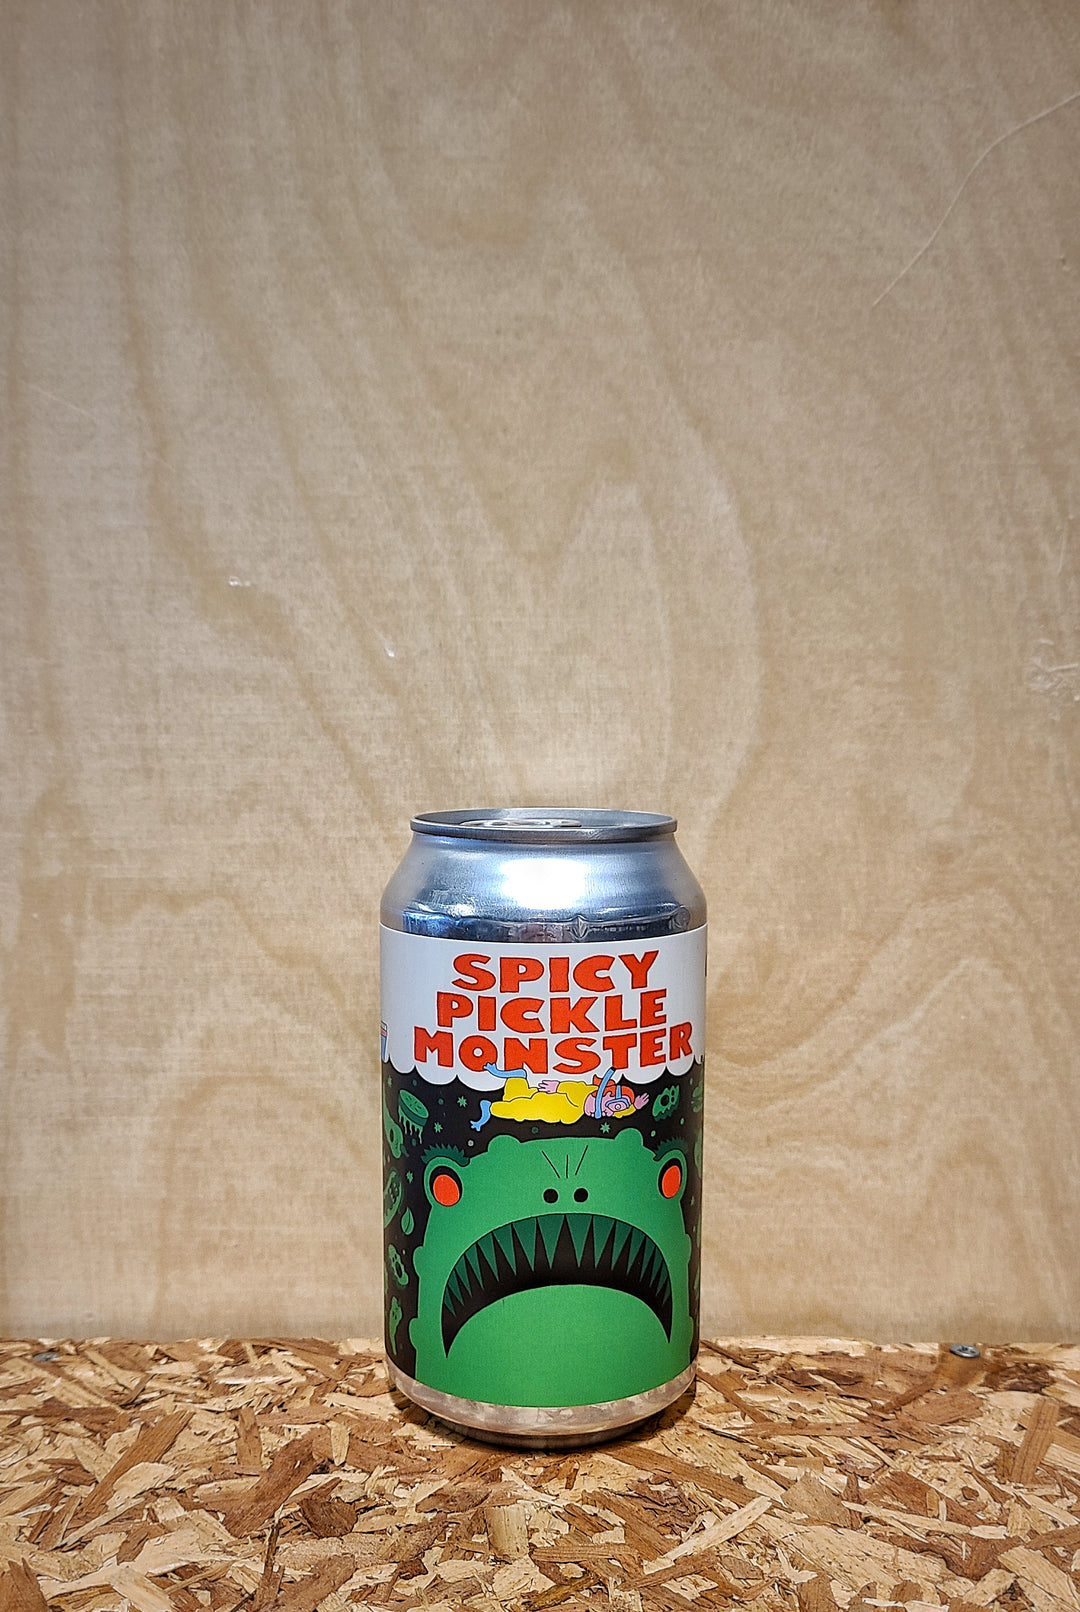 Prairie Artisan Ales 'Spicy Pickle Monster' Sour Ale with Spicy Dill Pickles, Orange, Lemon, and Lime (Oklahoma City, OK)